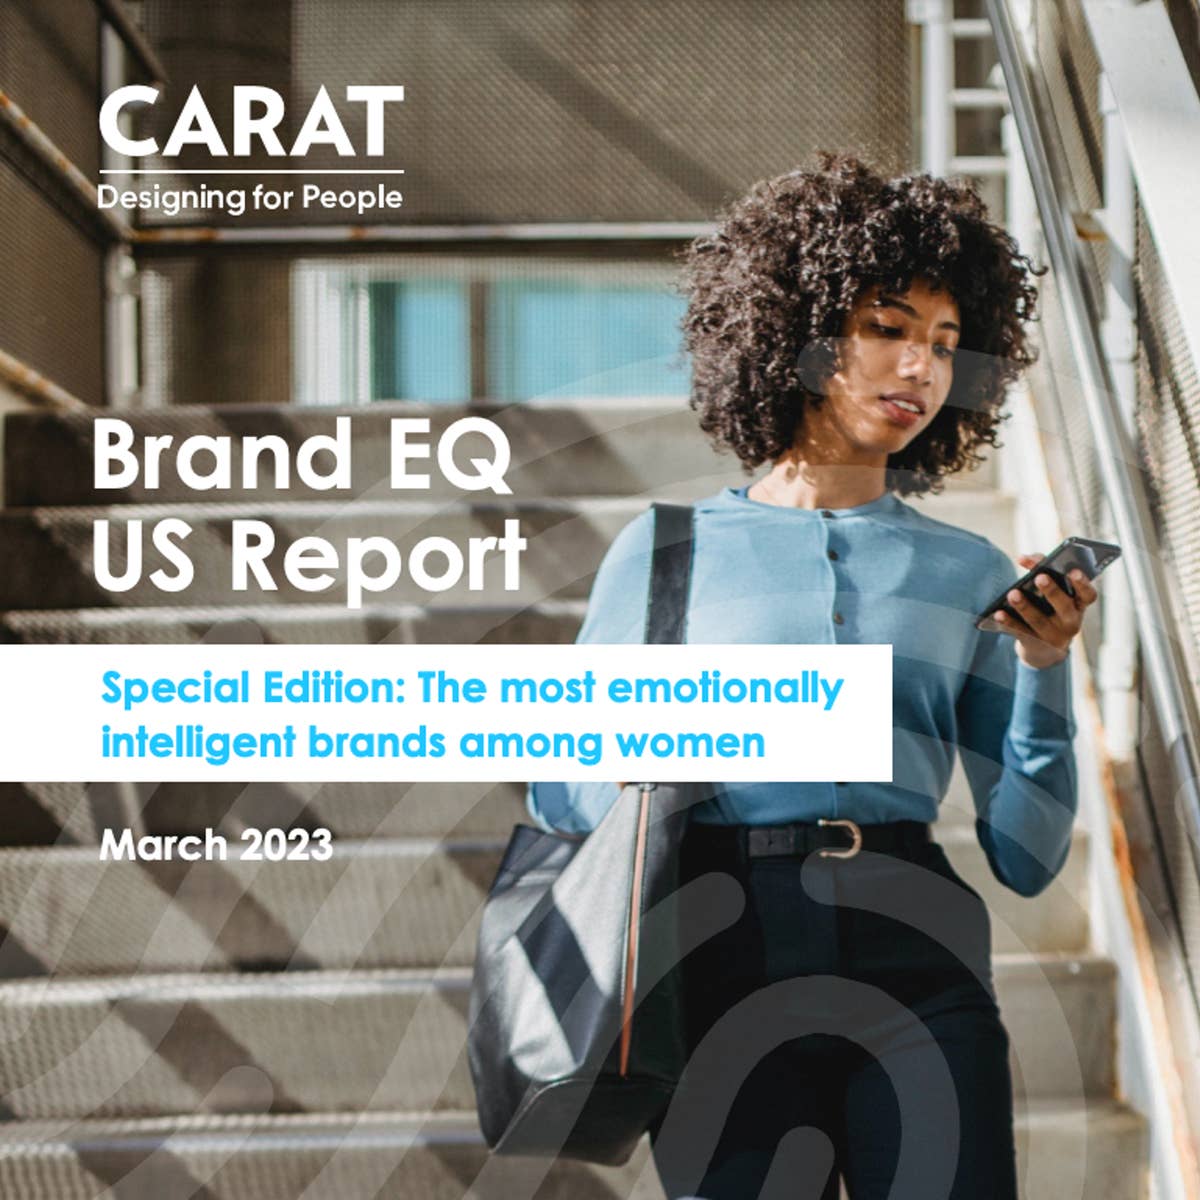 Brand EQ US Report Special Edition: The most emotionally intelligent brands among women